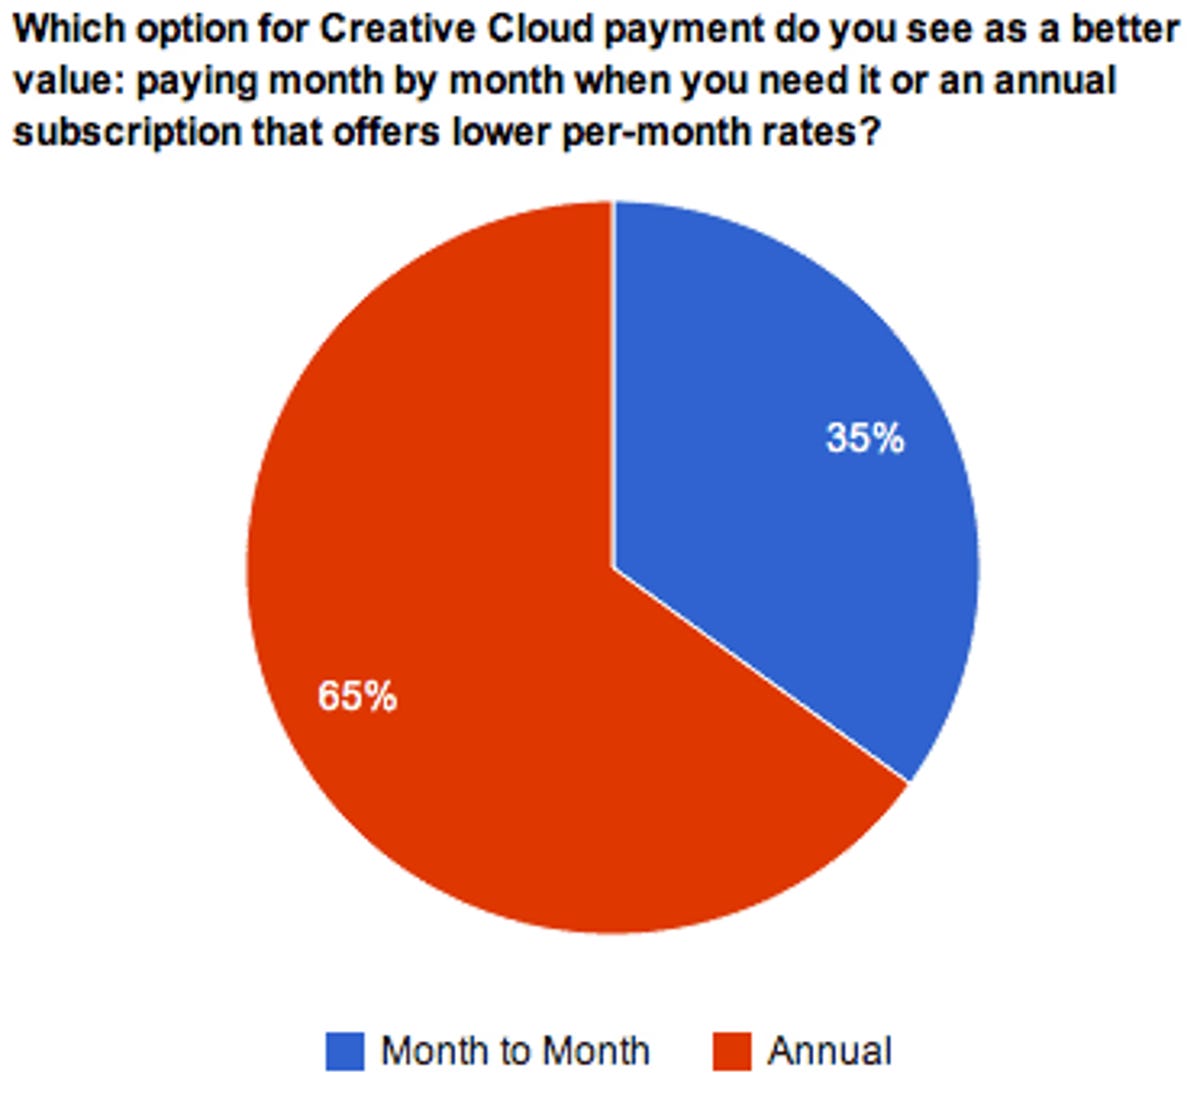 Customers generally see annual payments as better for the Creative Cloud.